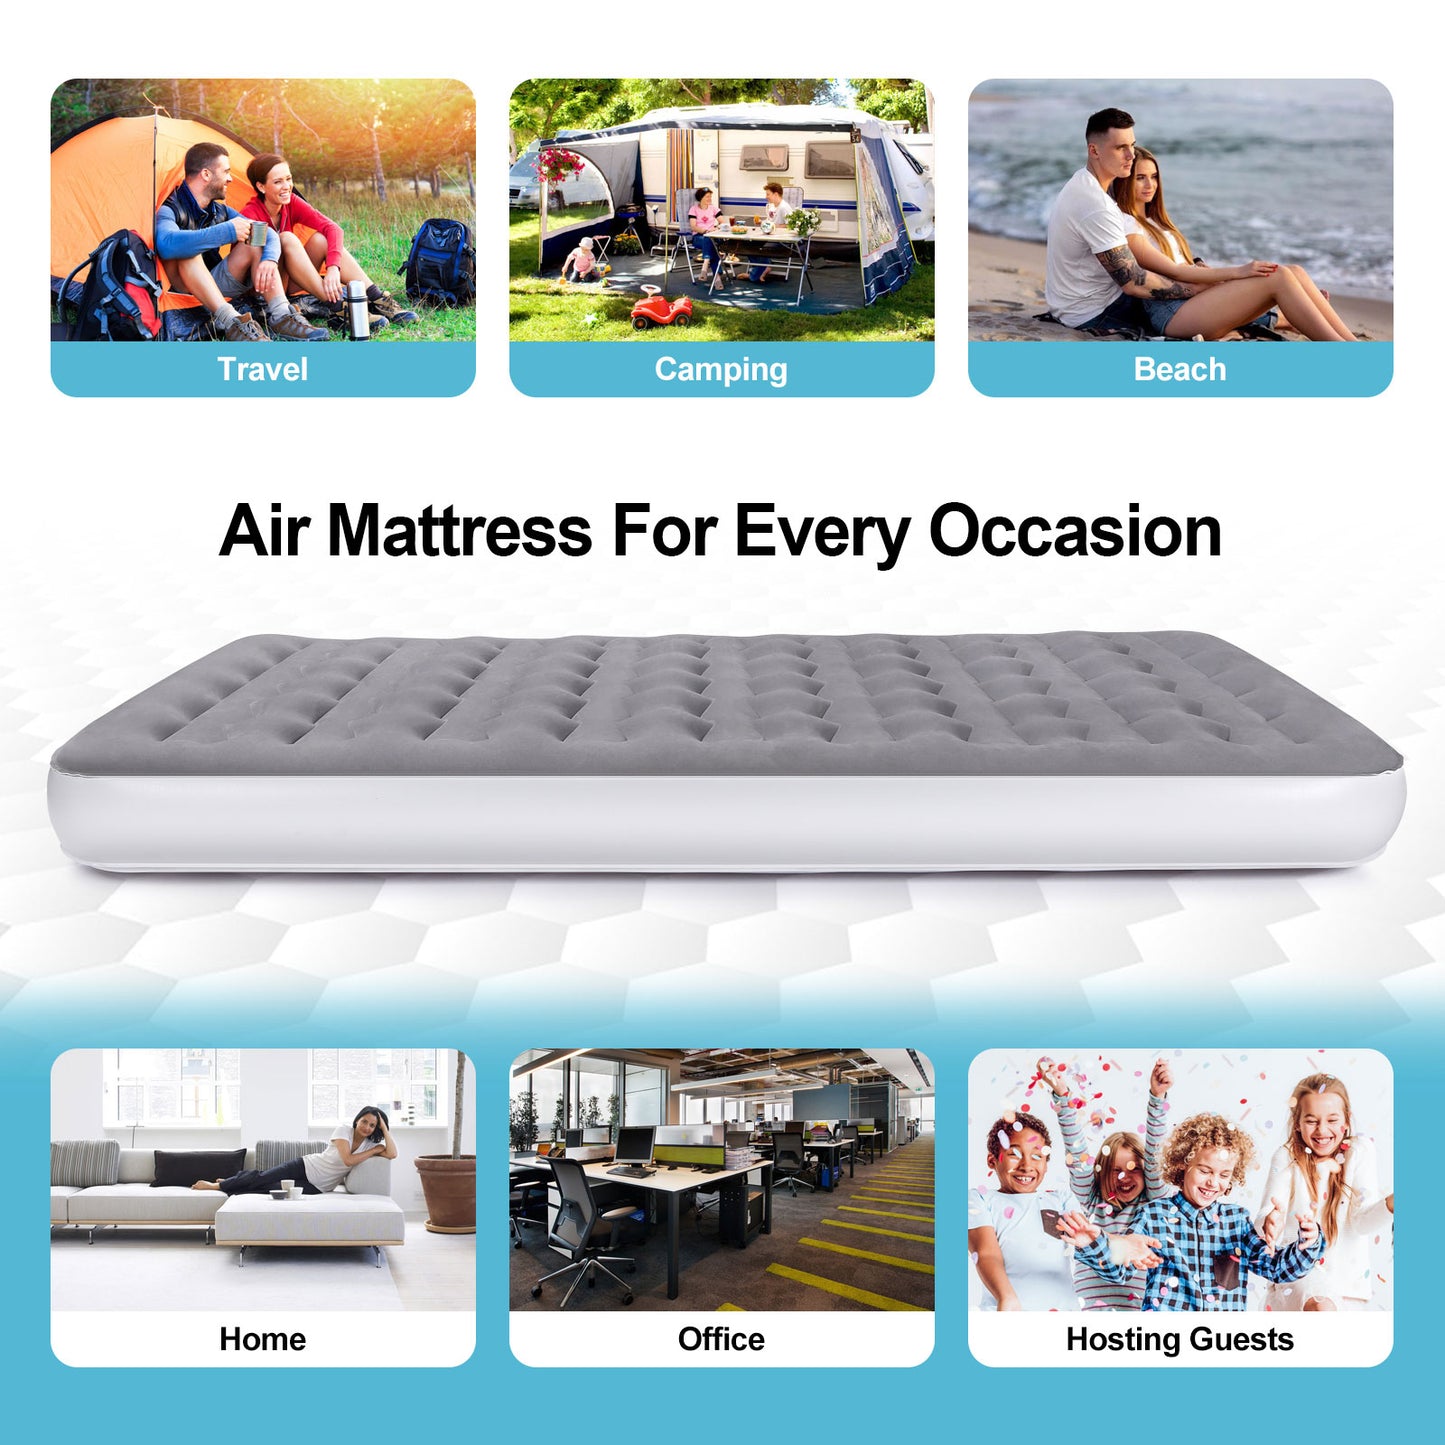 Air Mattress, Camping Lightweight Inflatable Bed with Electric Air Pump for Home, Travel, RV Tent and SUV Truck